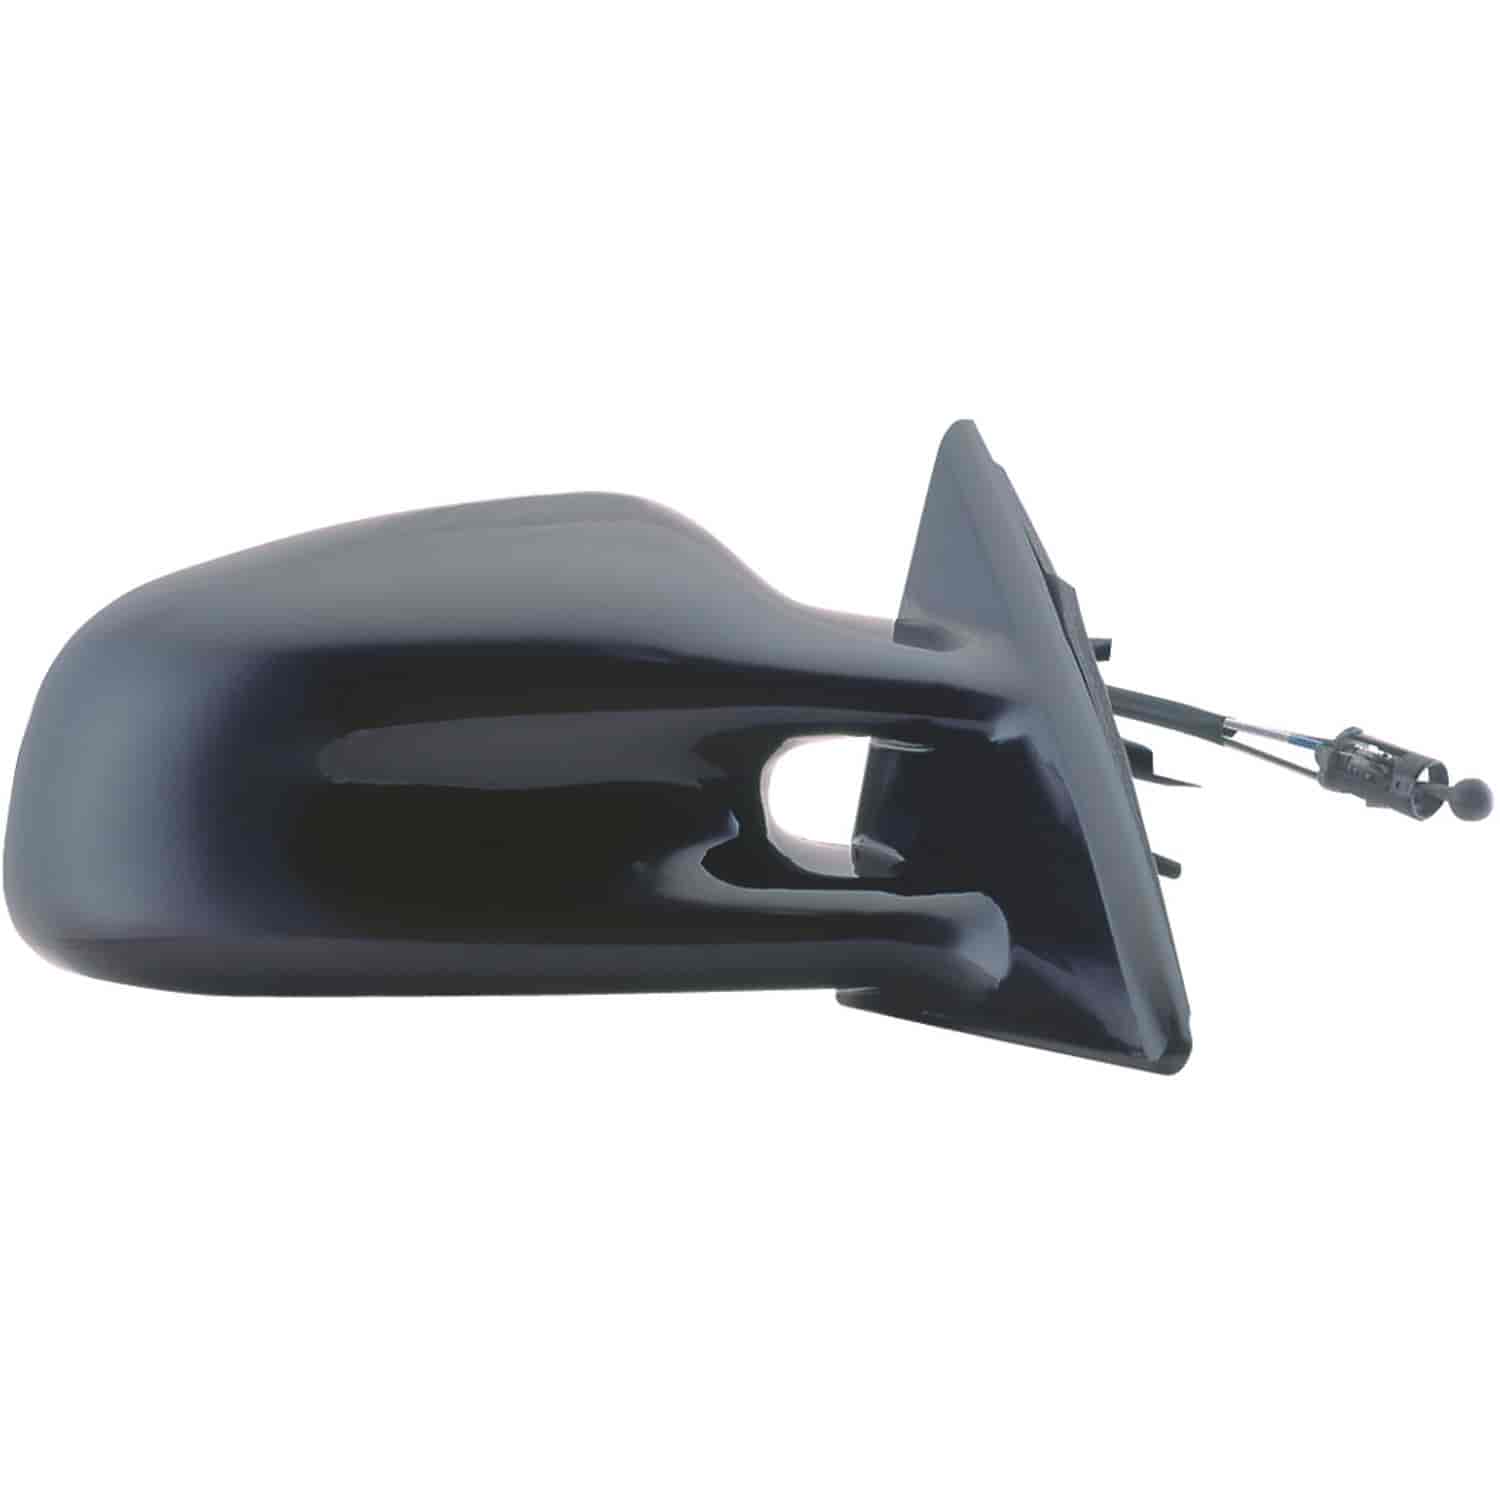 OEM Style Replacement mirror for 99-01 Pontiac Grand Am SE passenger side mirror tested to fit and f